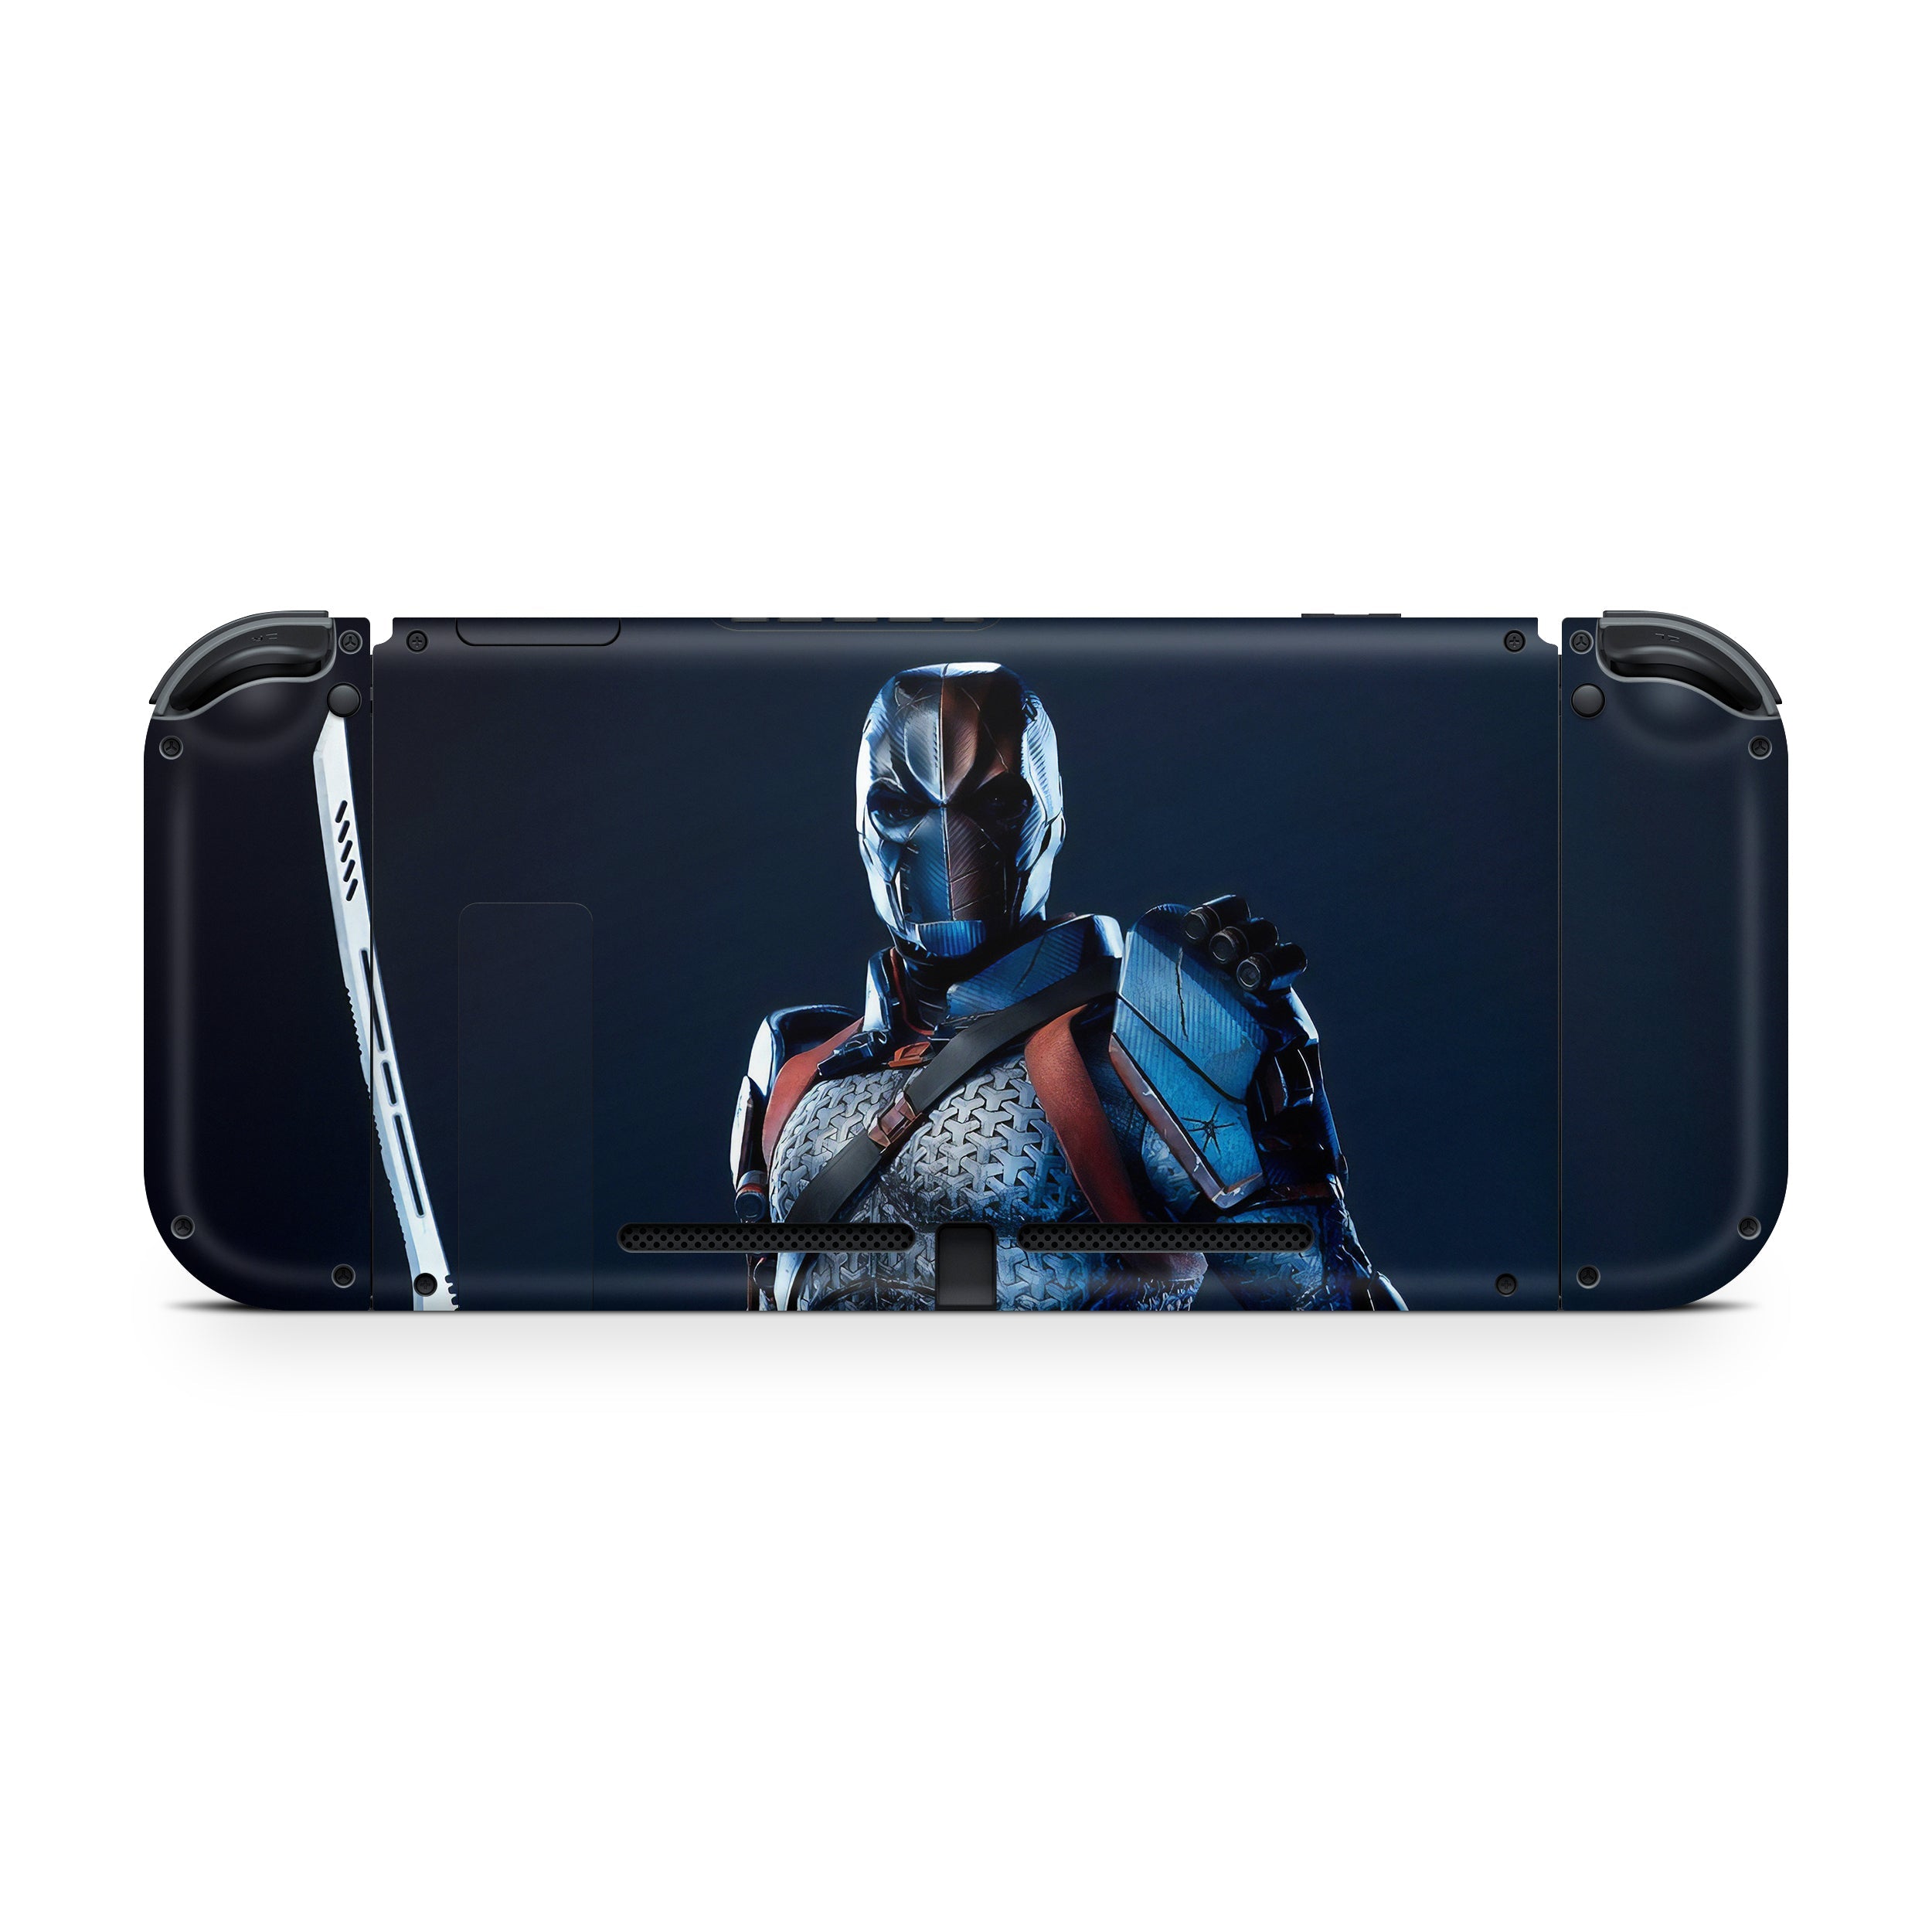 A video game skin featuring a DC Comics Deathstroke design for the Nintendo Switch.